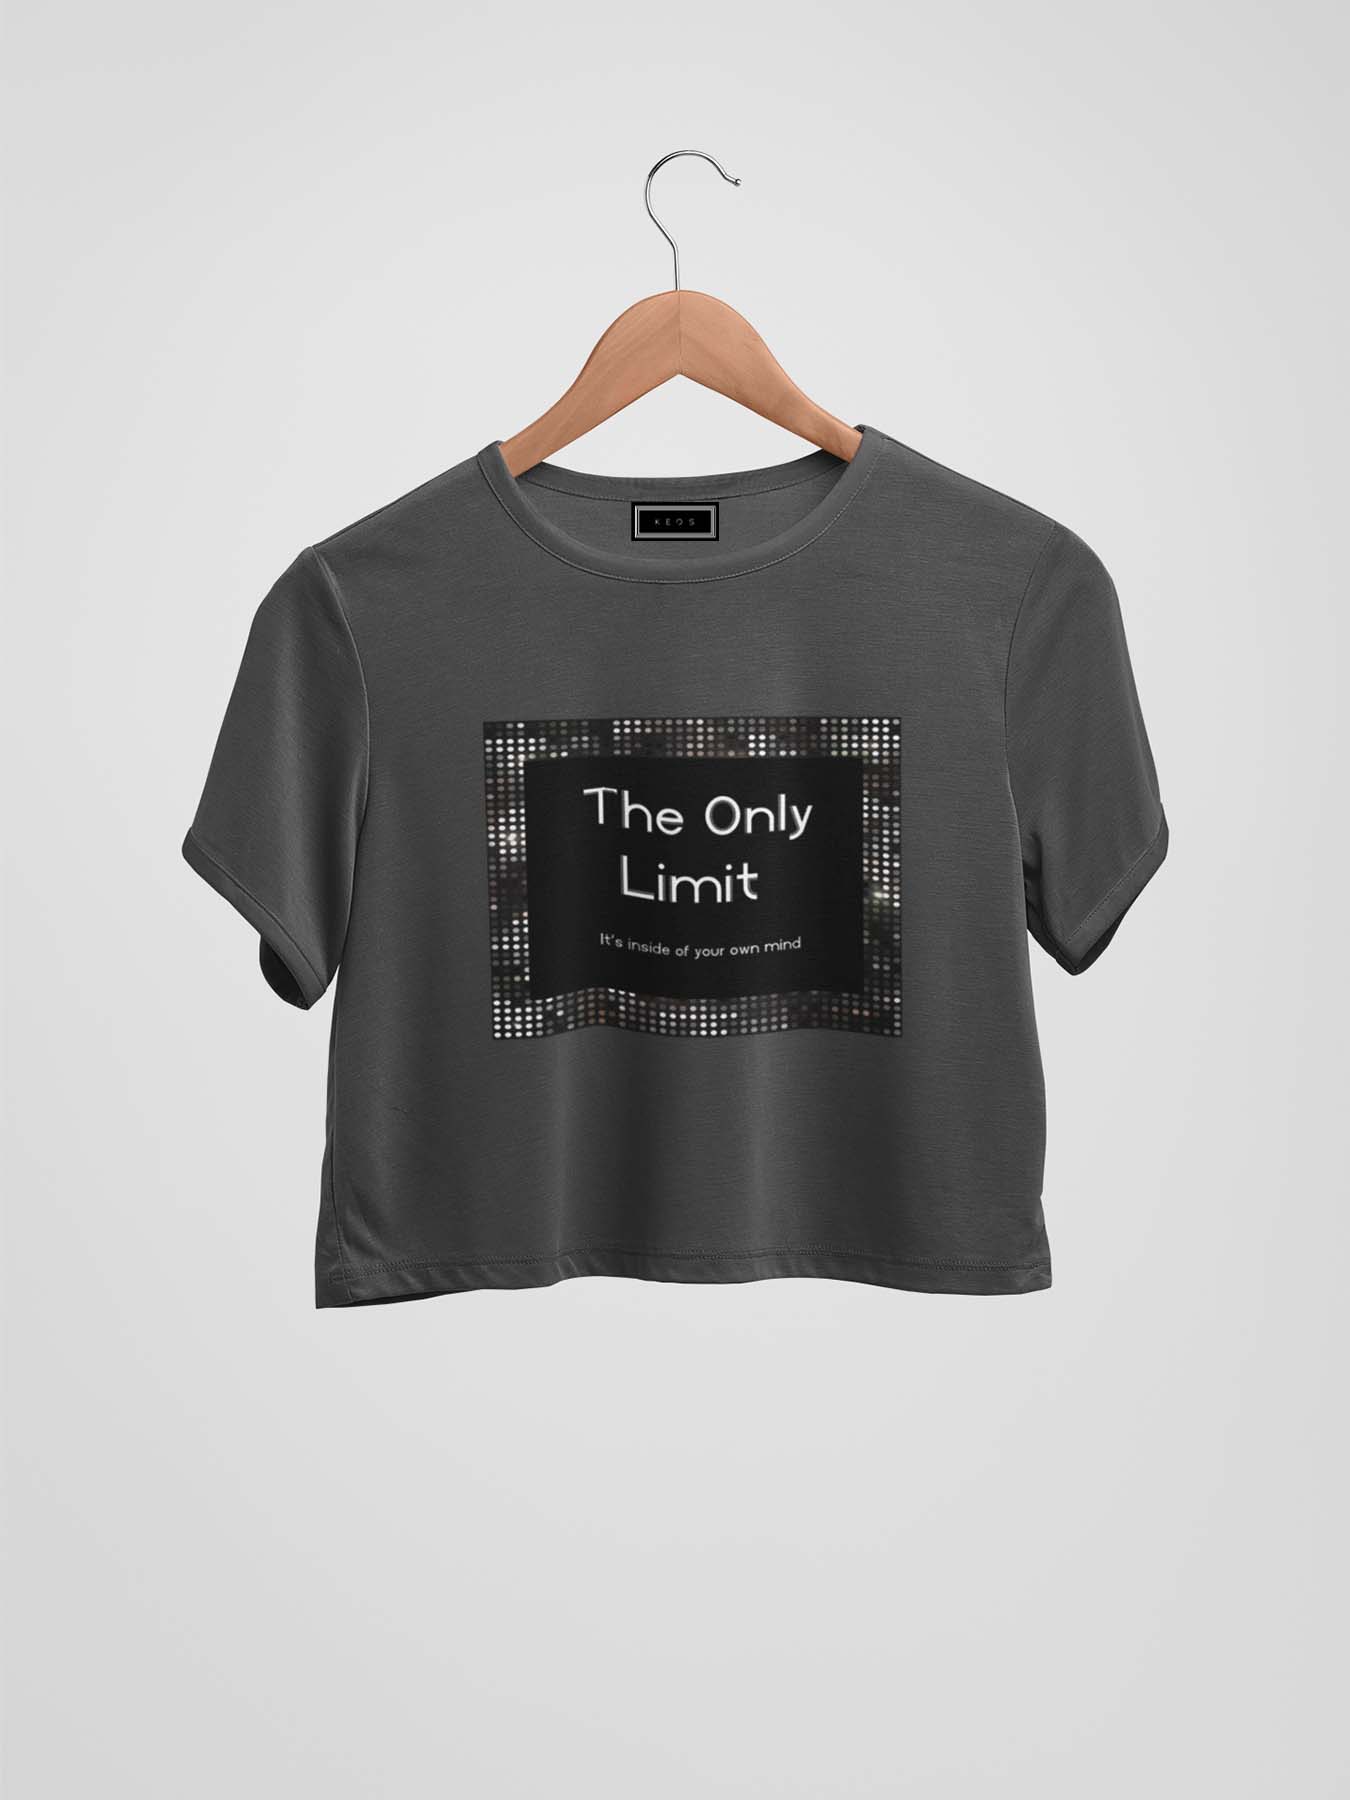 The Only Limit Organic Cotton Crop Top - keos.life